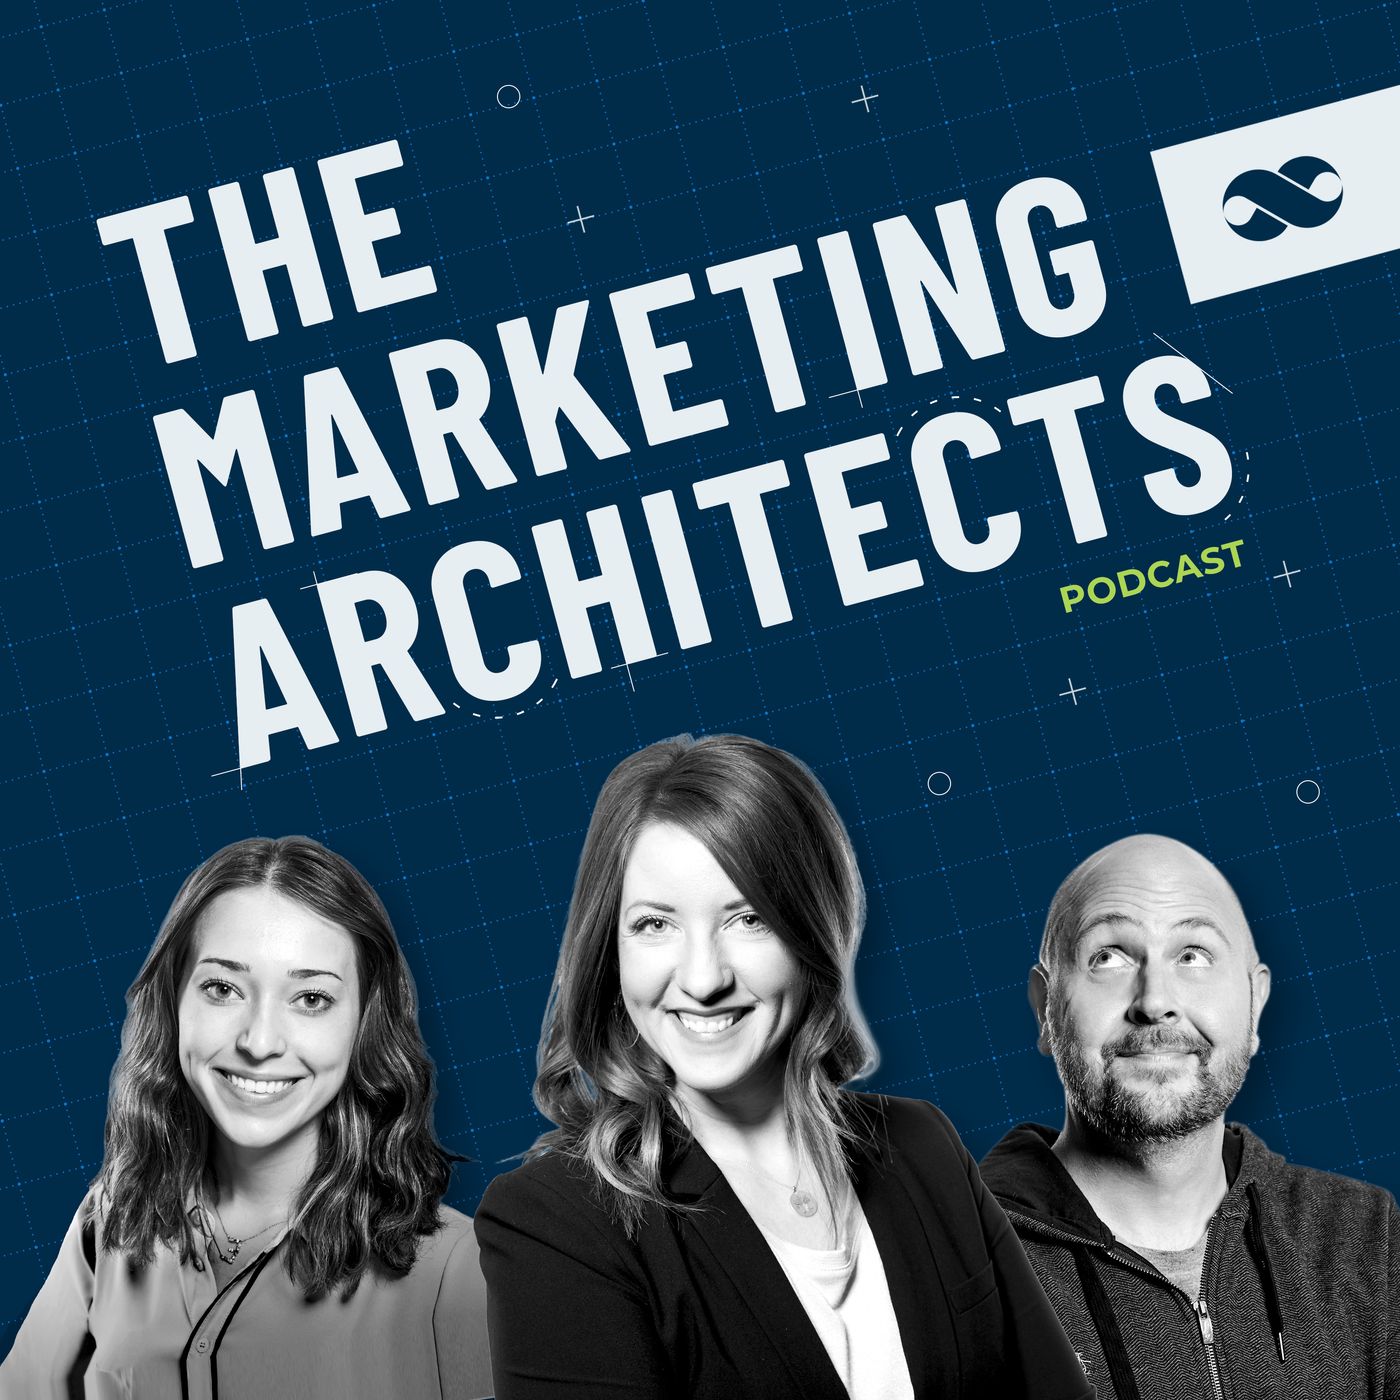 What Prevents Your Team from Achieving Marketing Effectiveness? by Marketing Architects